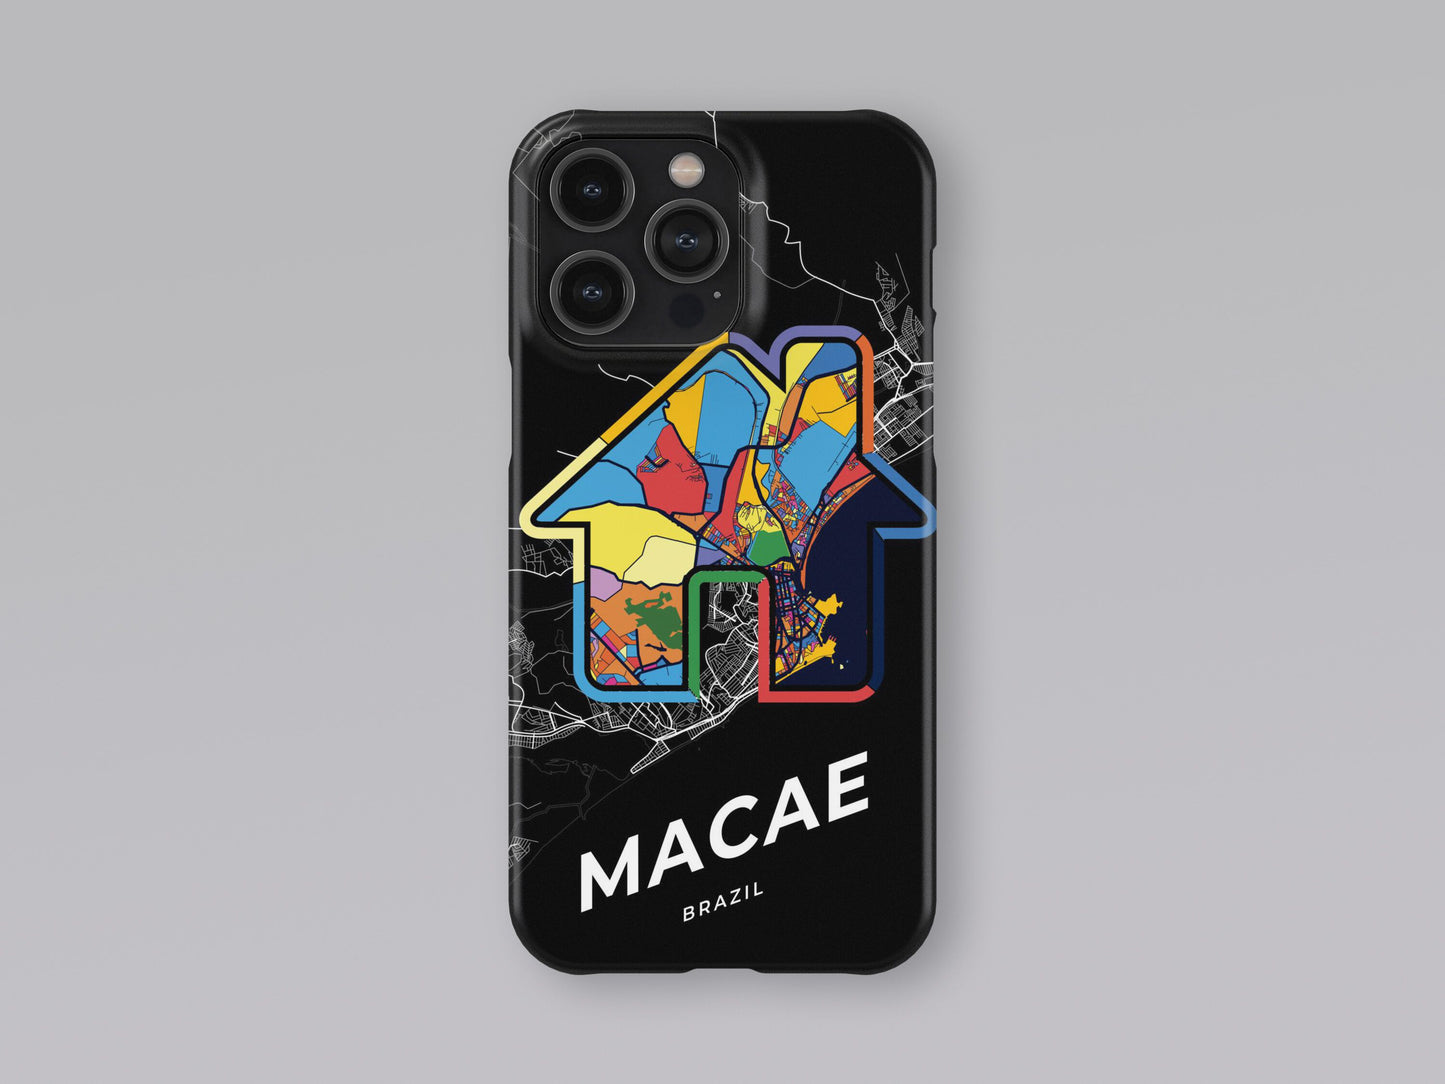 Macae Brazil slim phone case with colorful icon. Birthday, wedding or housewarming gift. Couple match cases. 3